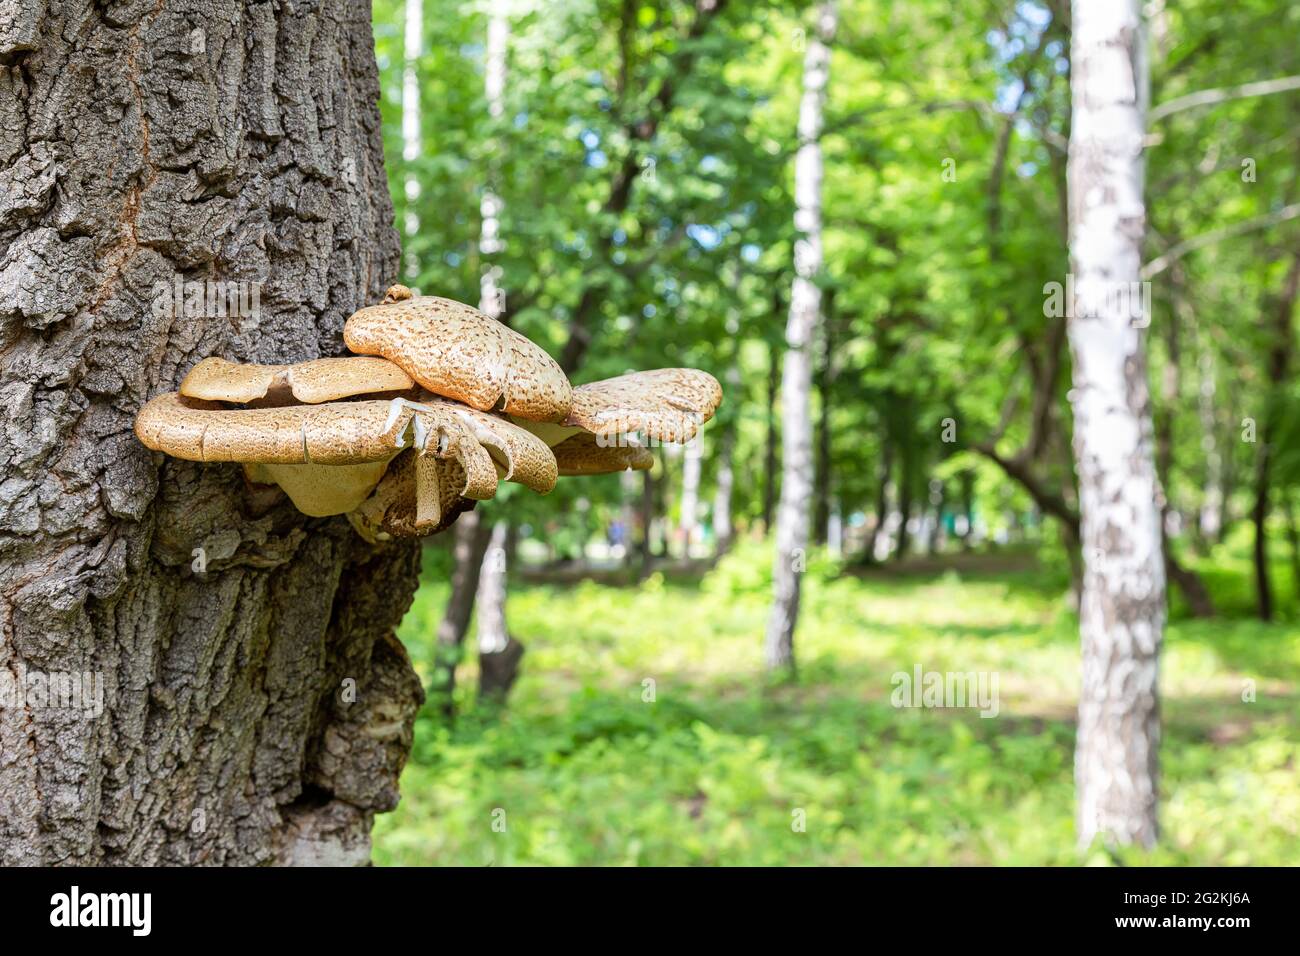 Mushroom parasite growing on the bark of a tree in a city park Stock Photo